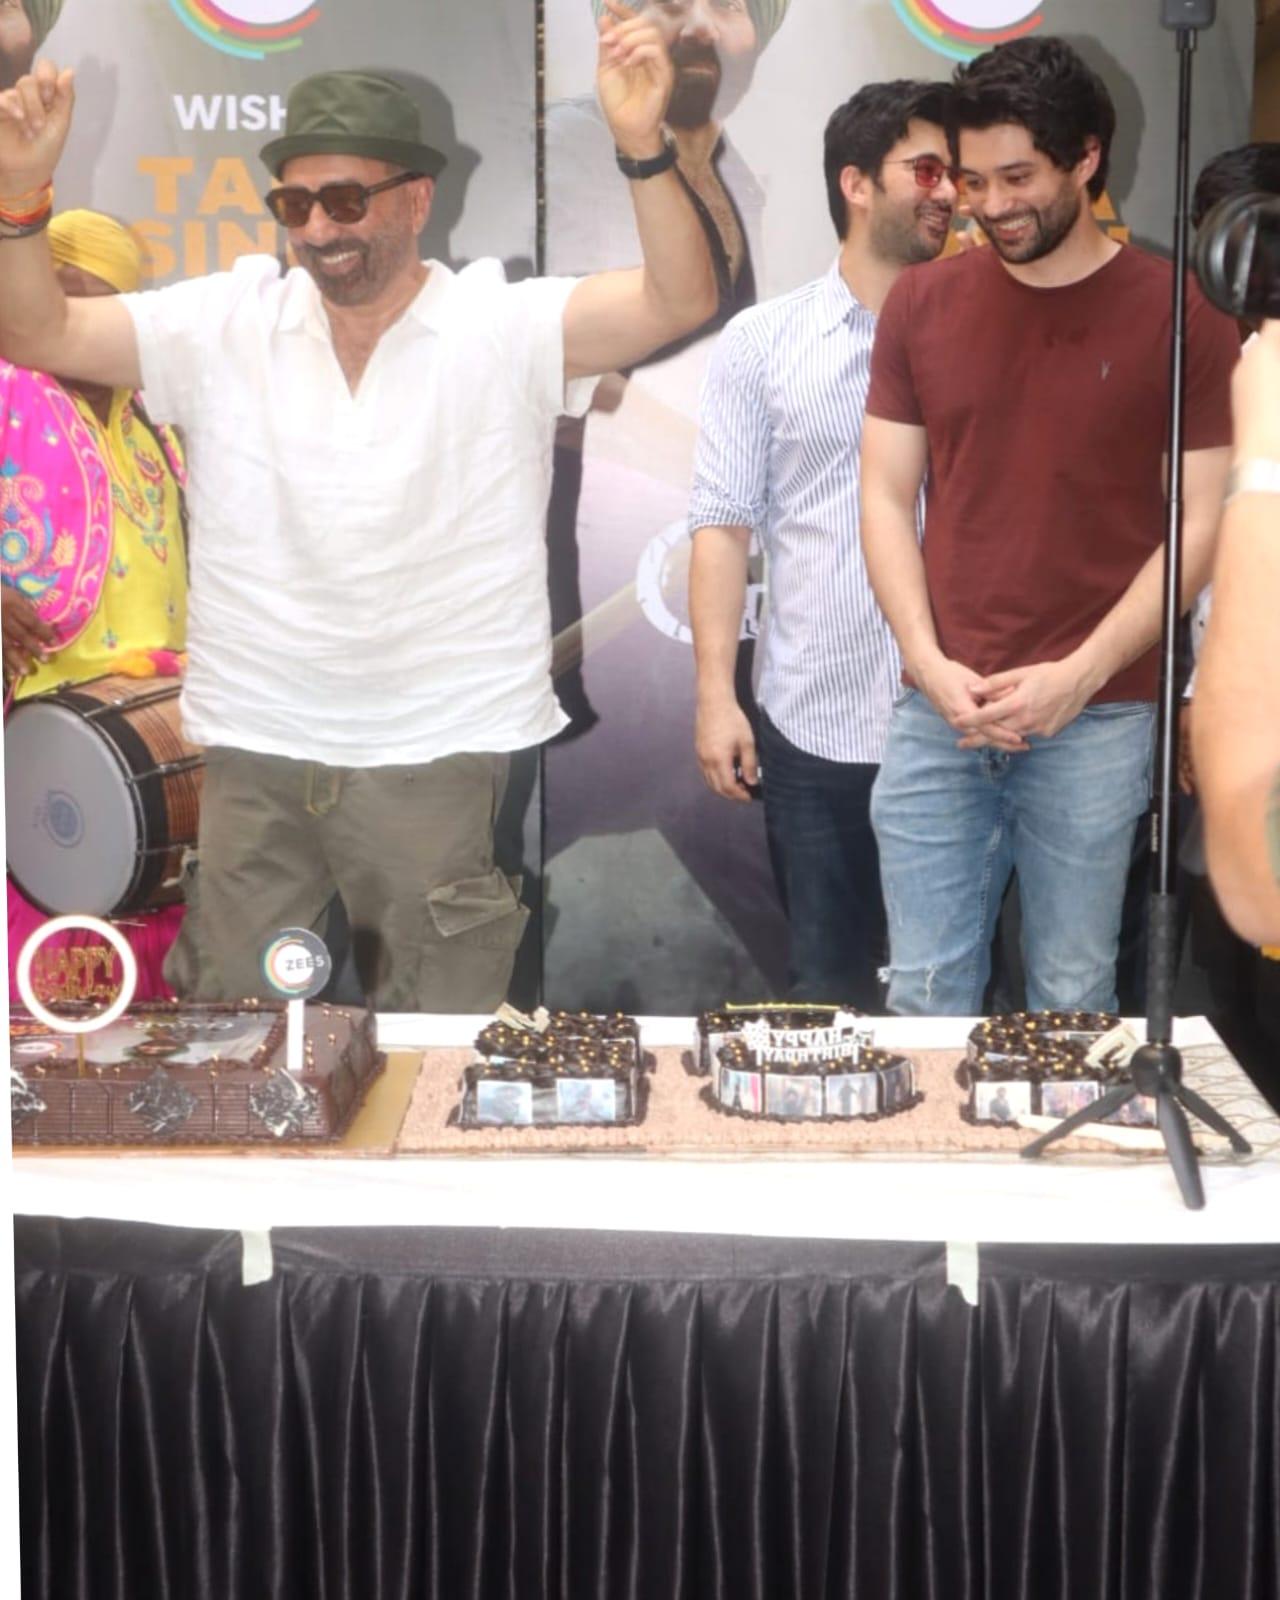 Sunny Deol looked truly happy to be celebrating with his loved ones